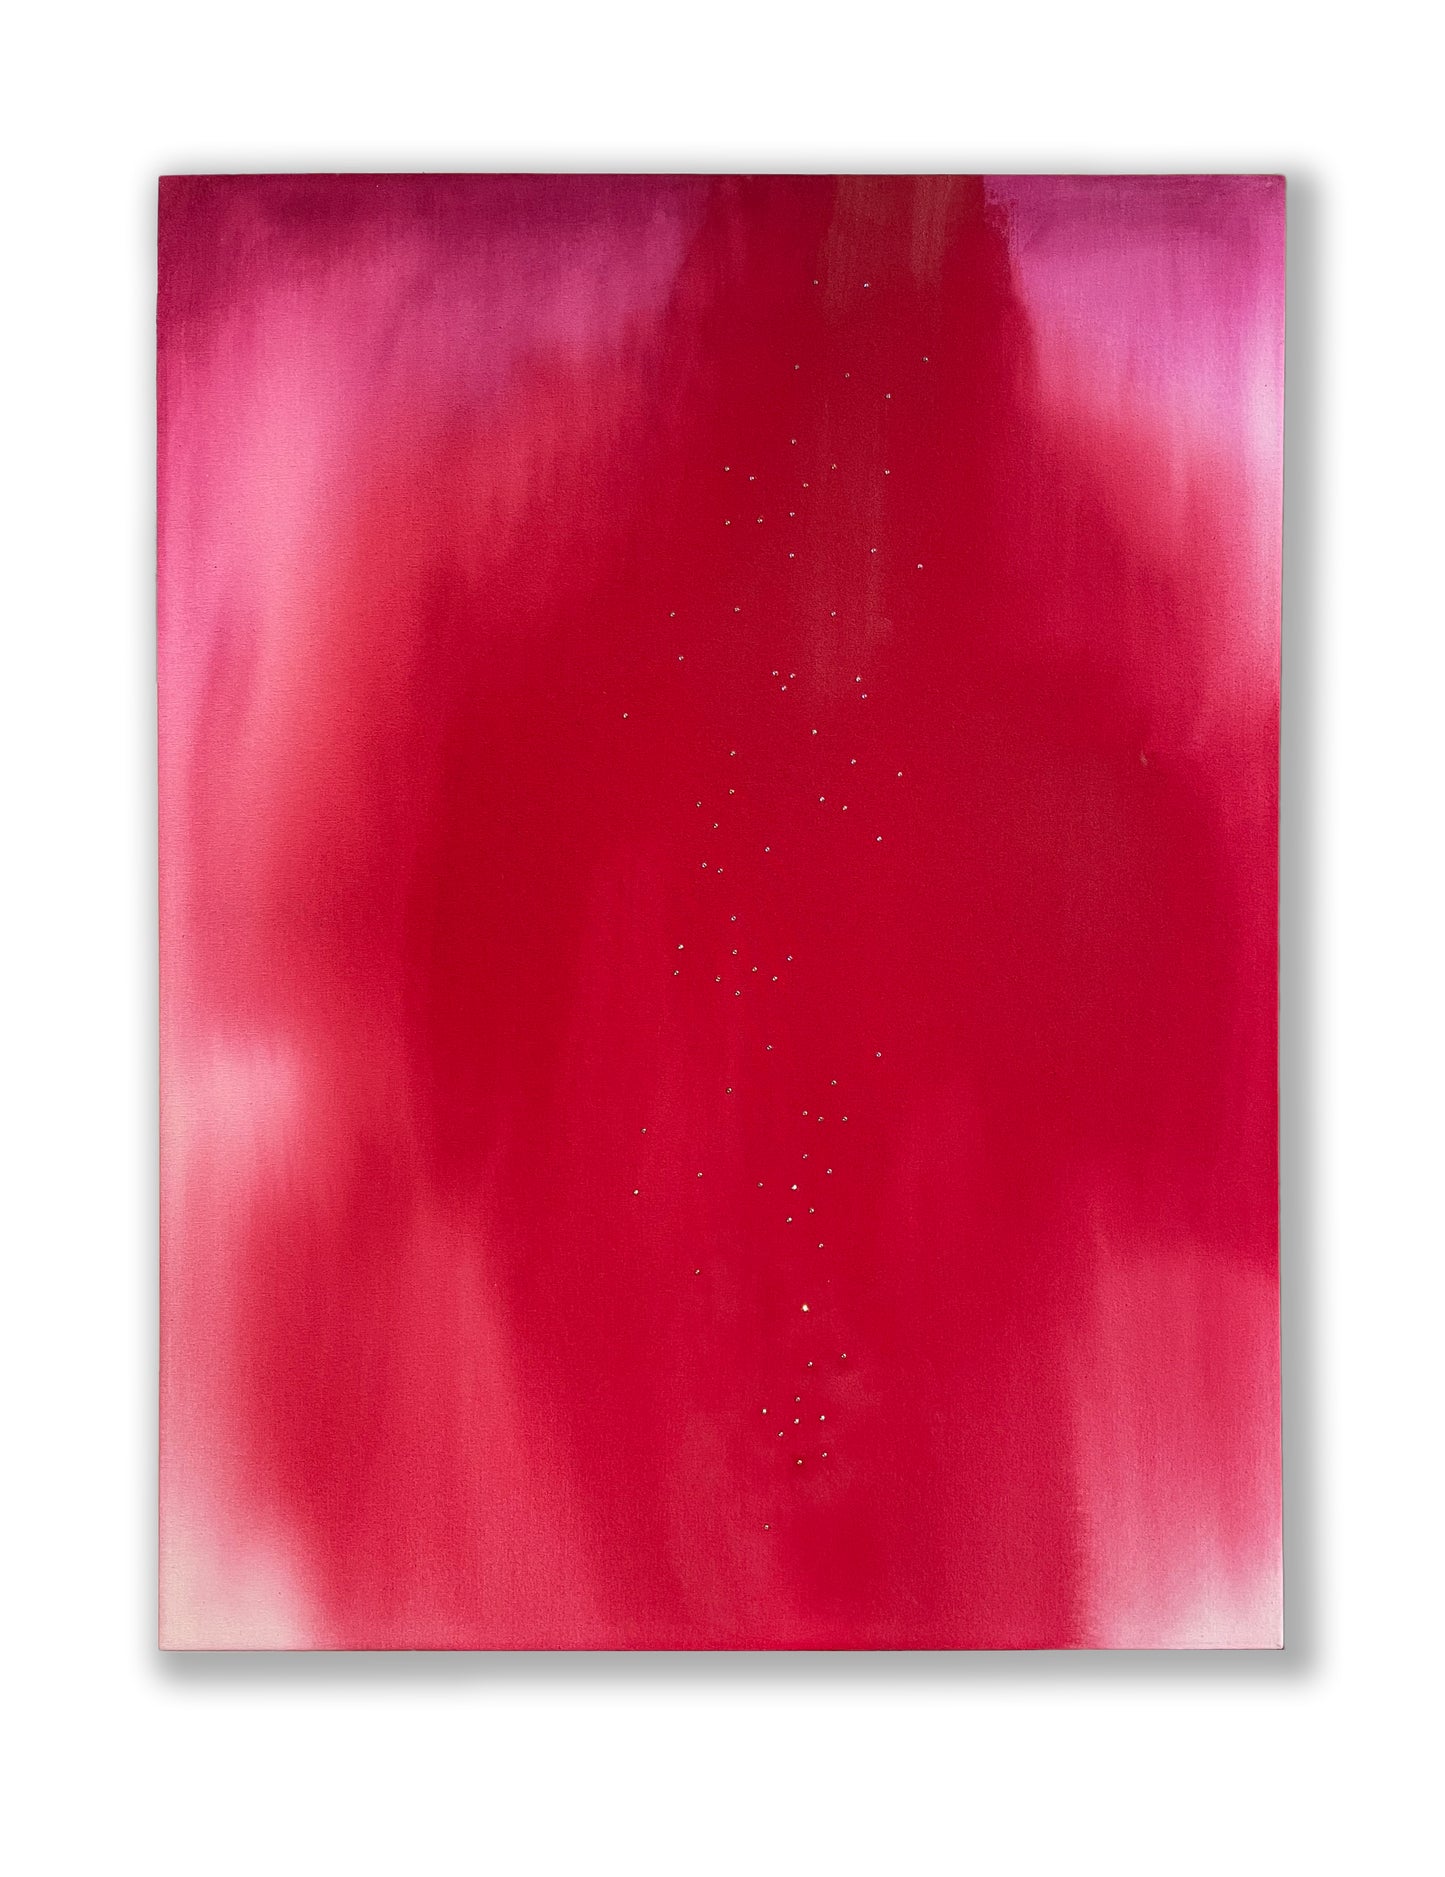 Study for Red Painting with Light